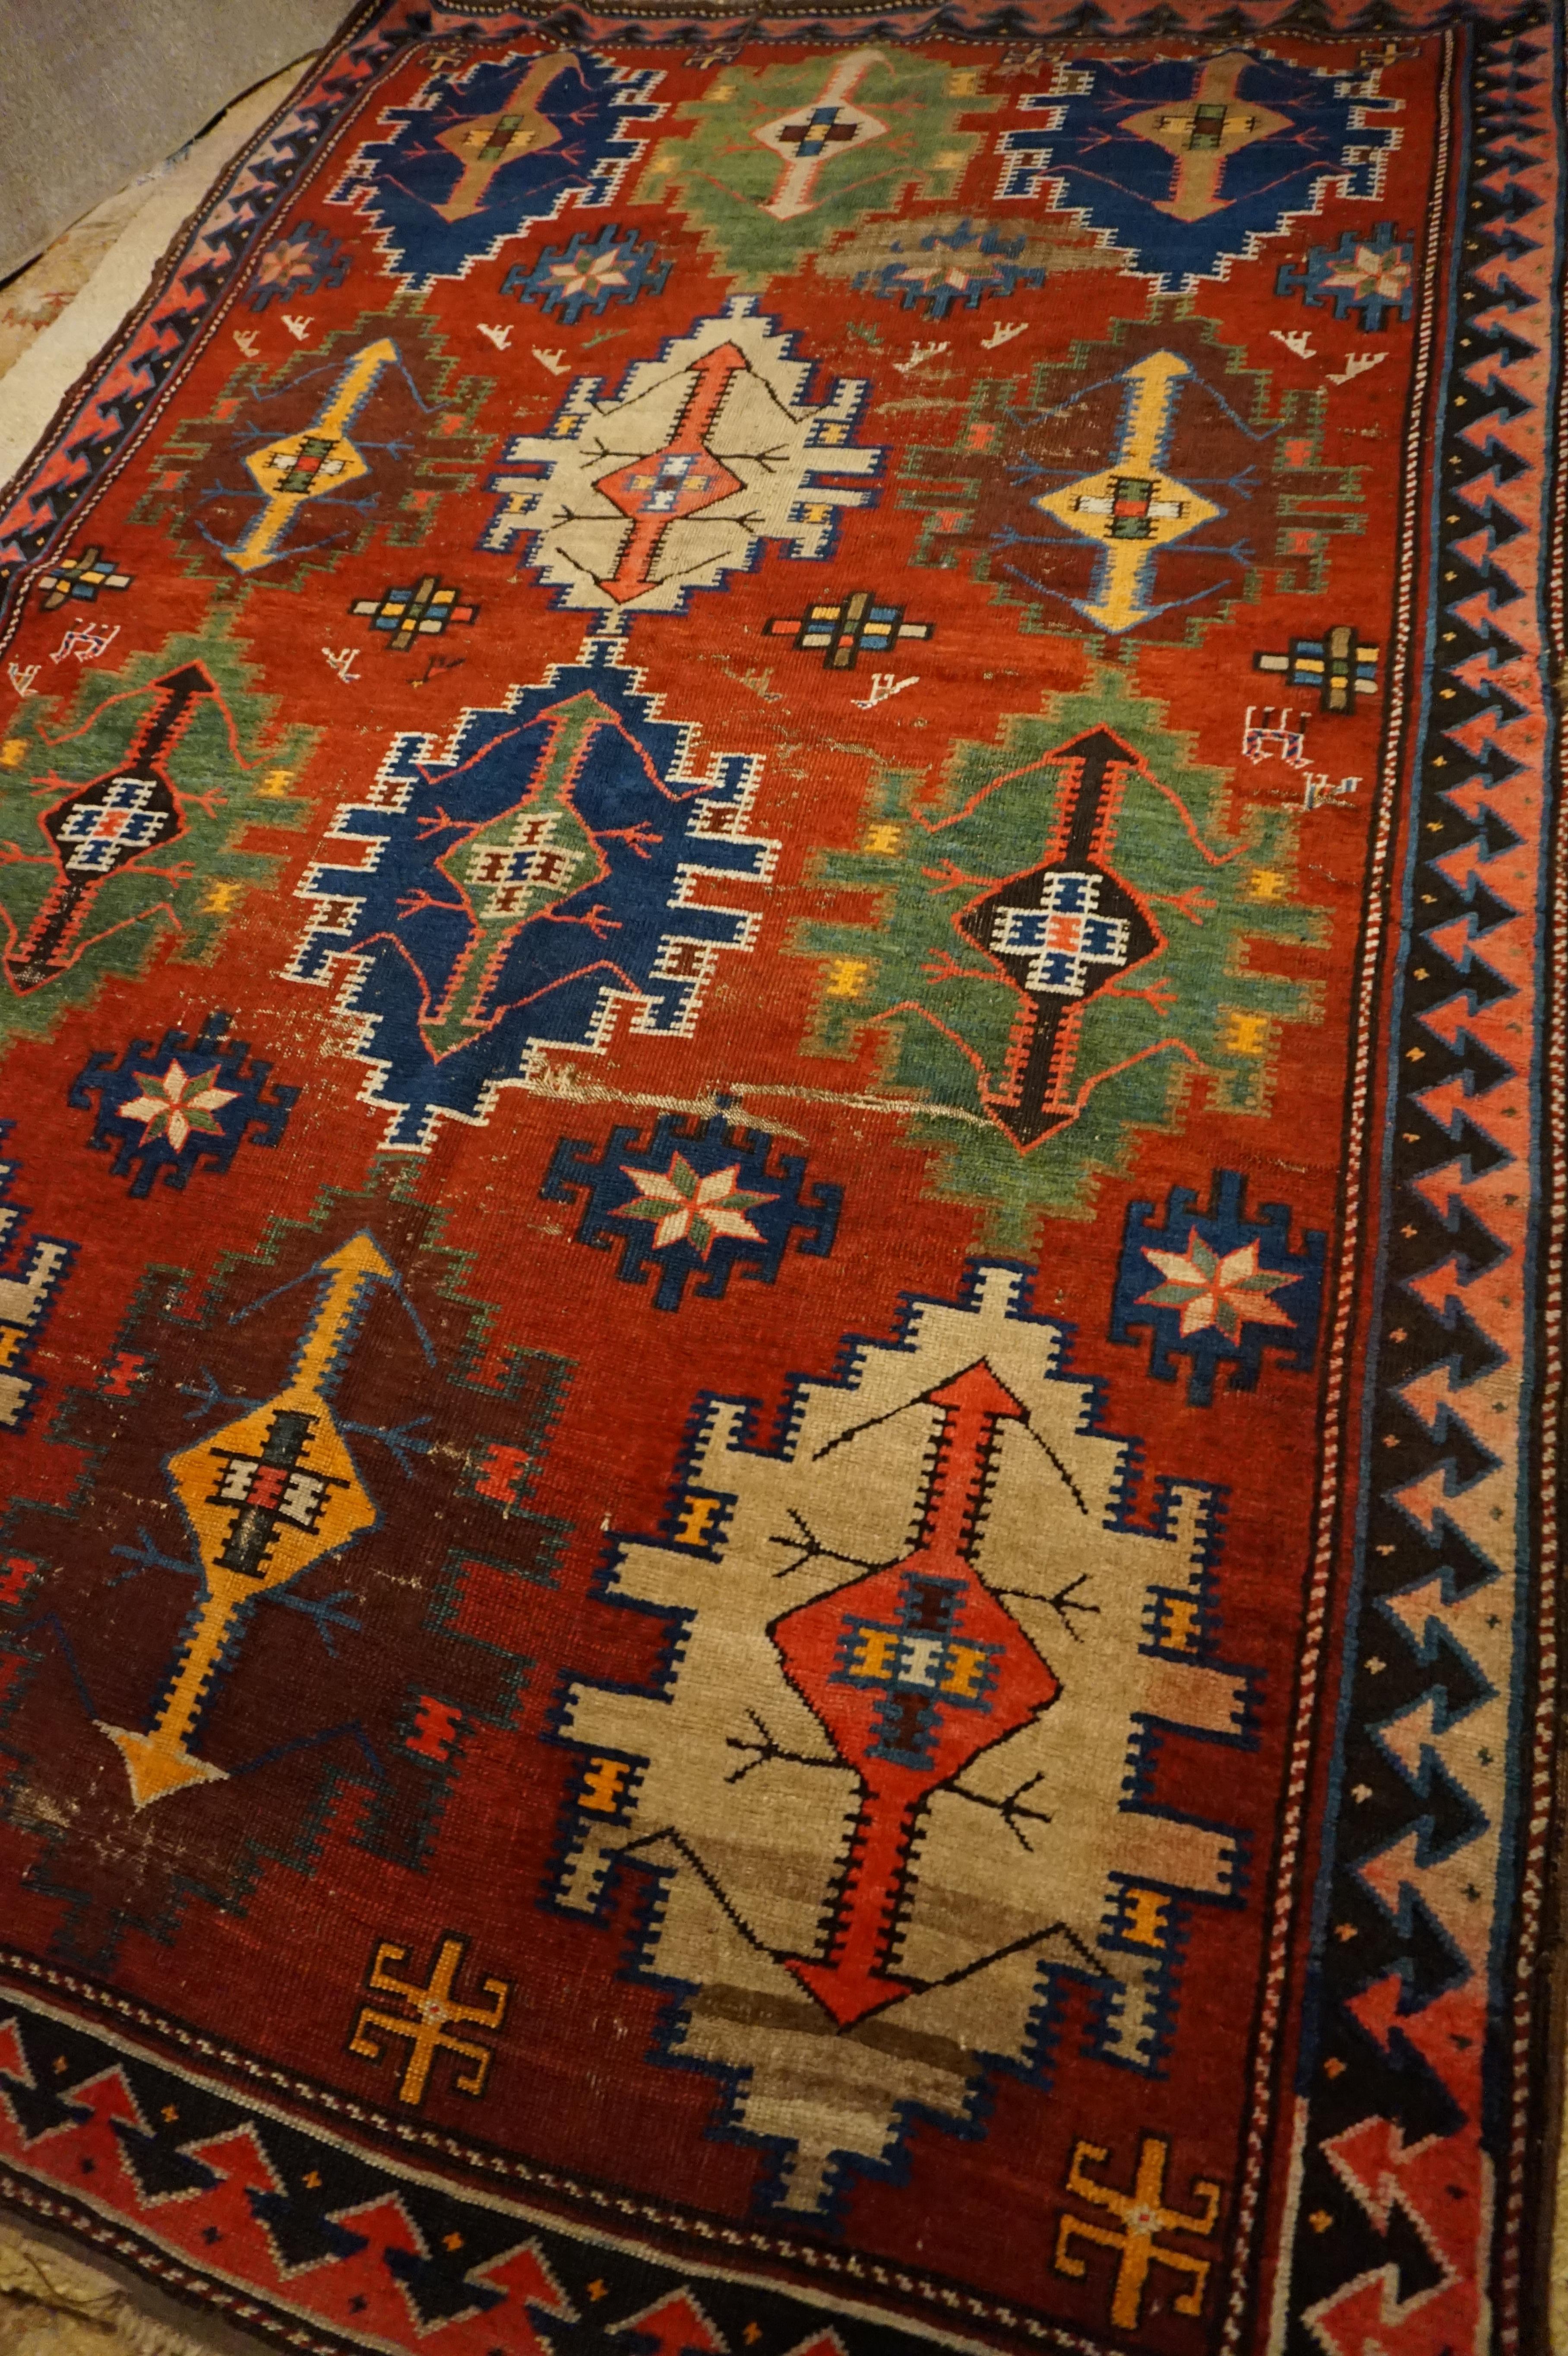 Vivid hues in natural dues and medallions that appear to be hanging lamps. This rug exudes great warmth. Woven in natural dues. Some low pile areas as shown and minor fringe wear but in overall good condition with lots of life to offer,

circa